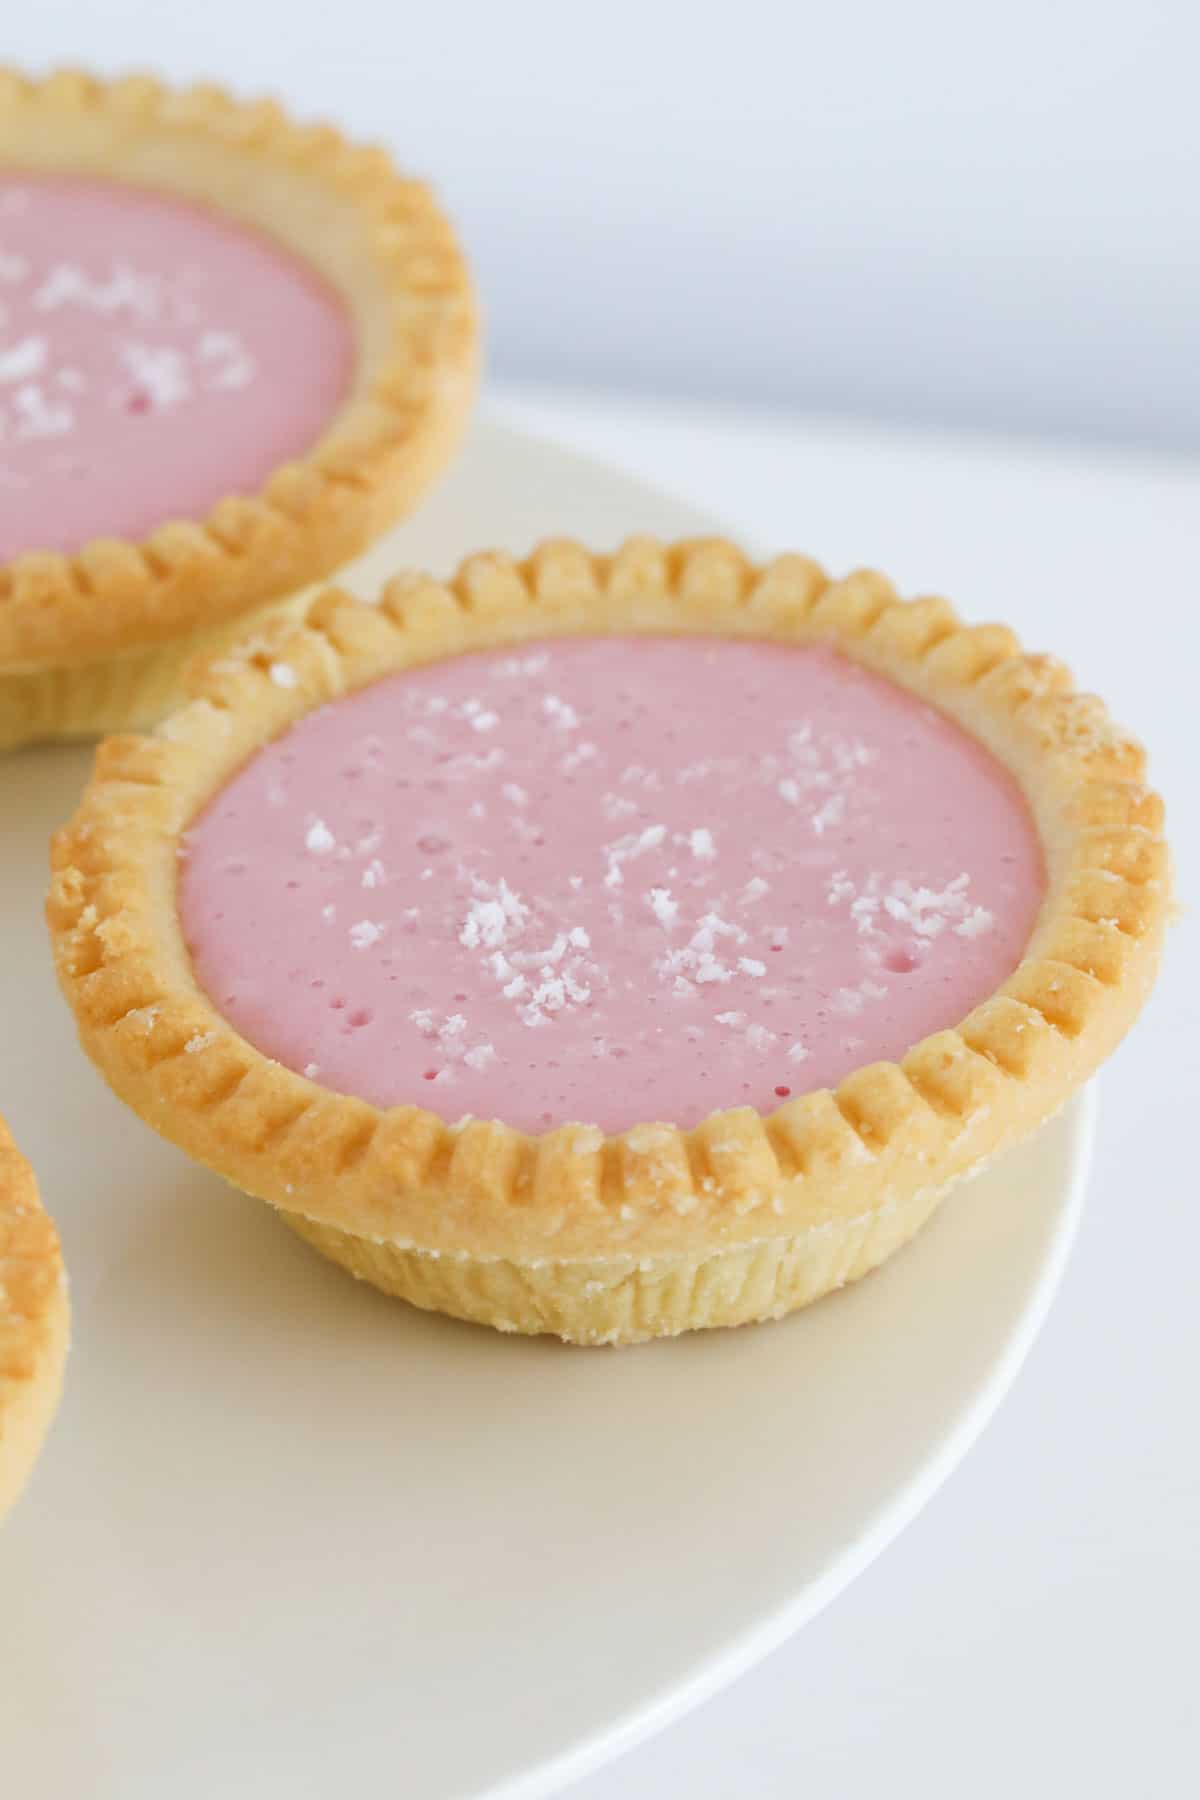 A pink marshmallow filling in a pastry shell, served on a white plate